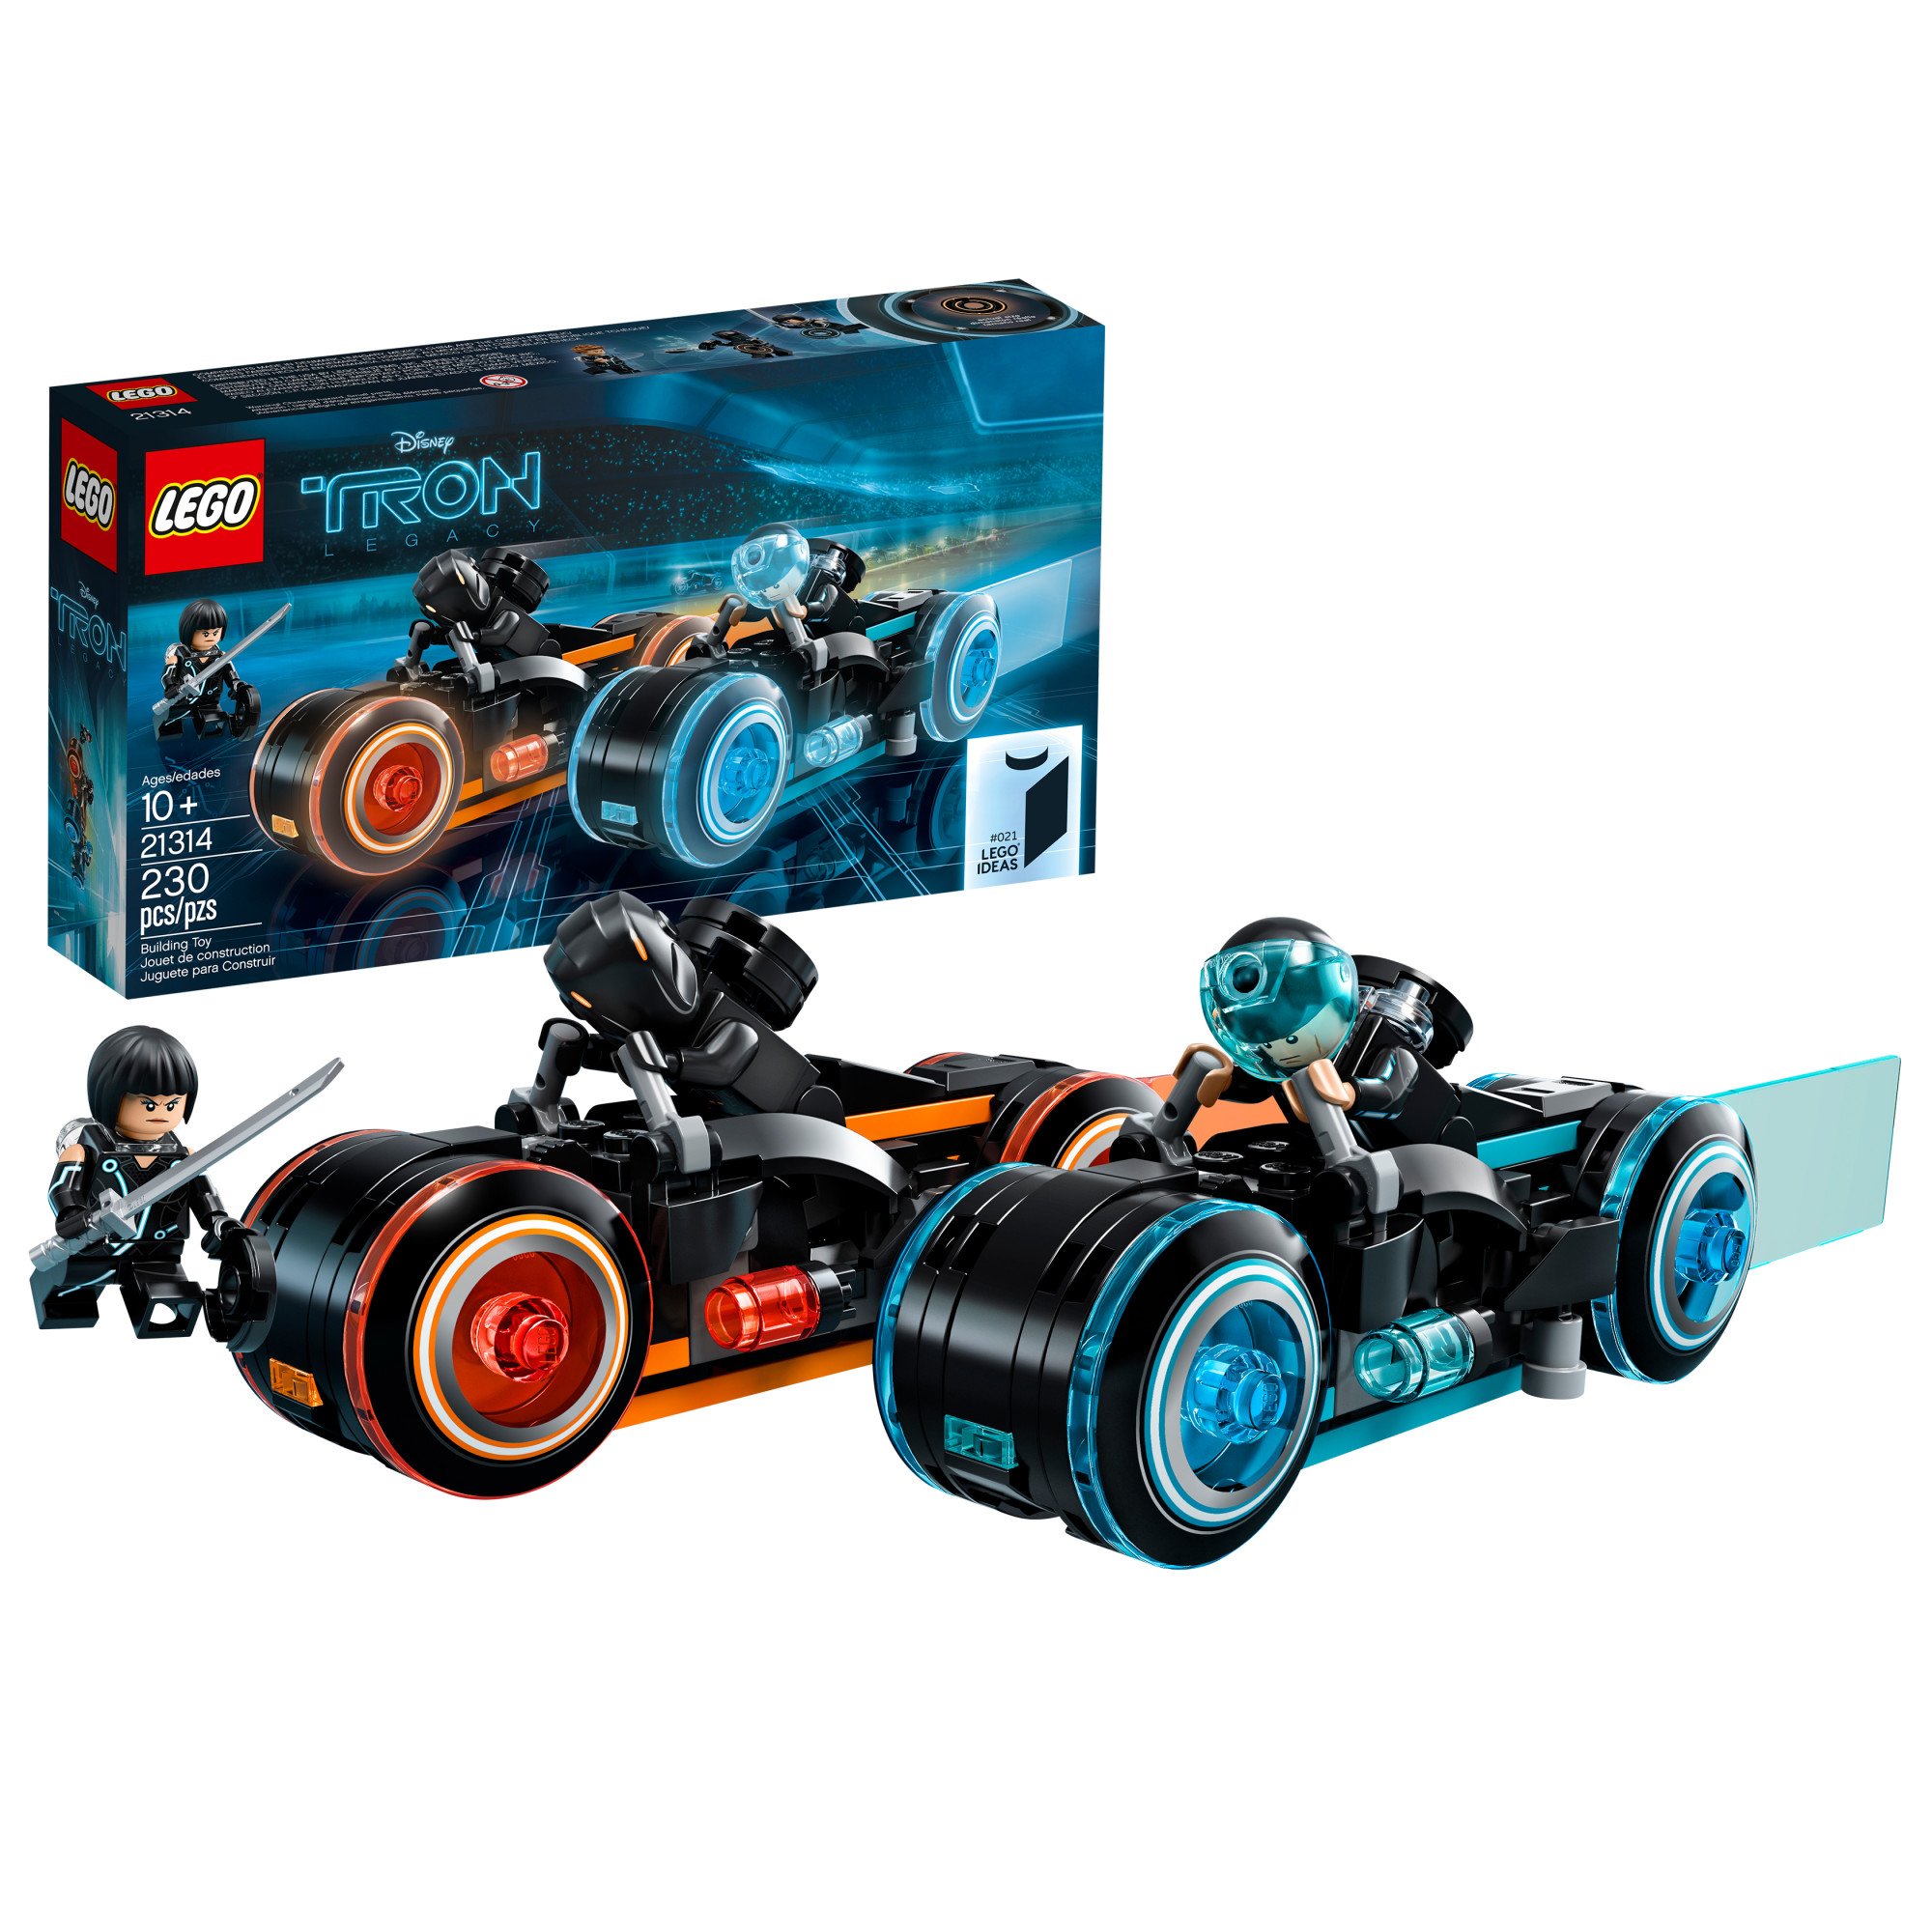 Book Cover LEGO Ideas TRON: Legacy 21314 Construction Toy inspired by Disney’s TRON: Legacy movie (230 Pieces)